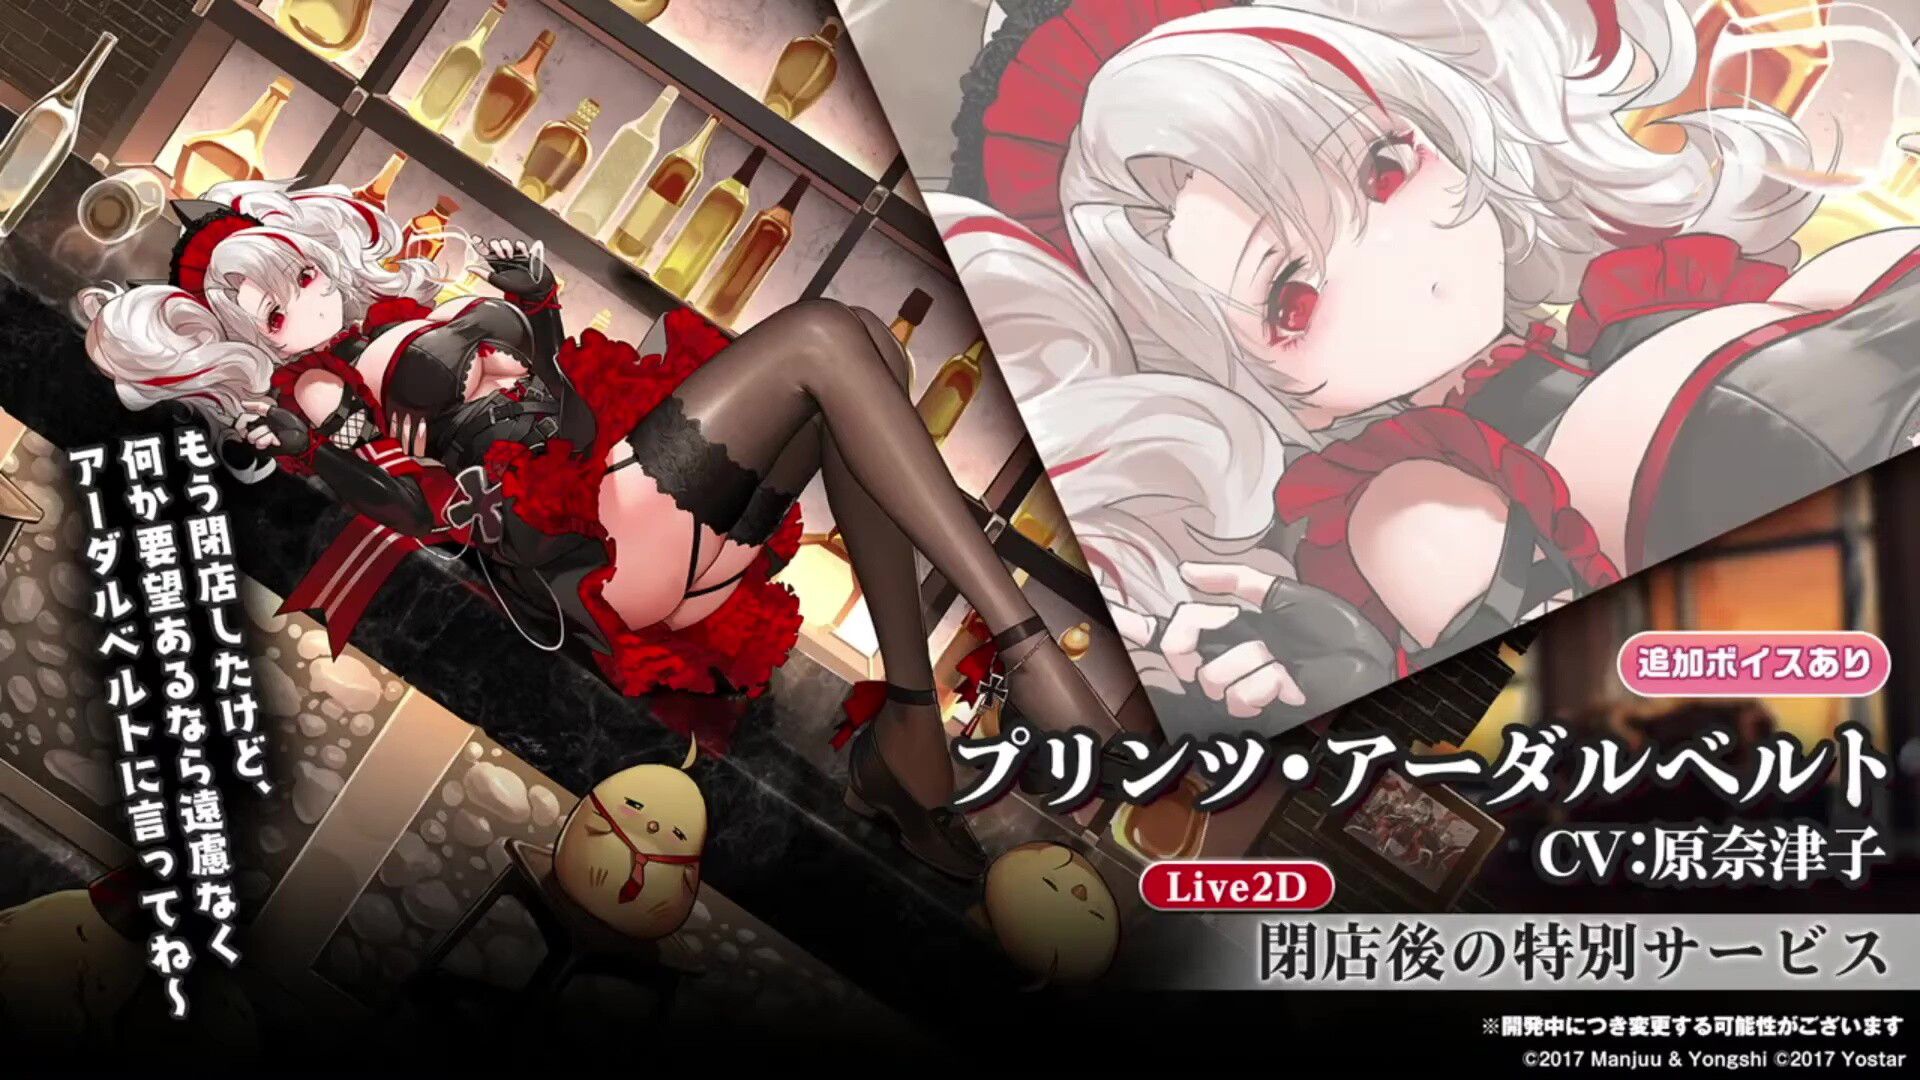 Erotic costumes such as "Azur Lane" erotic new character, whipmuchiro Santa and whipmuchi erotic maid clothes 16